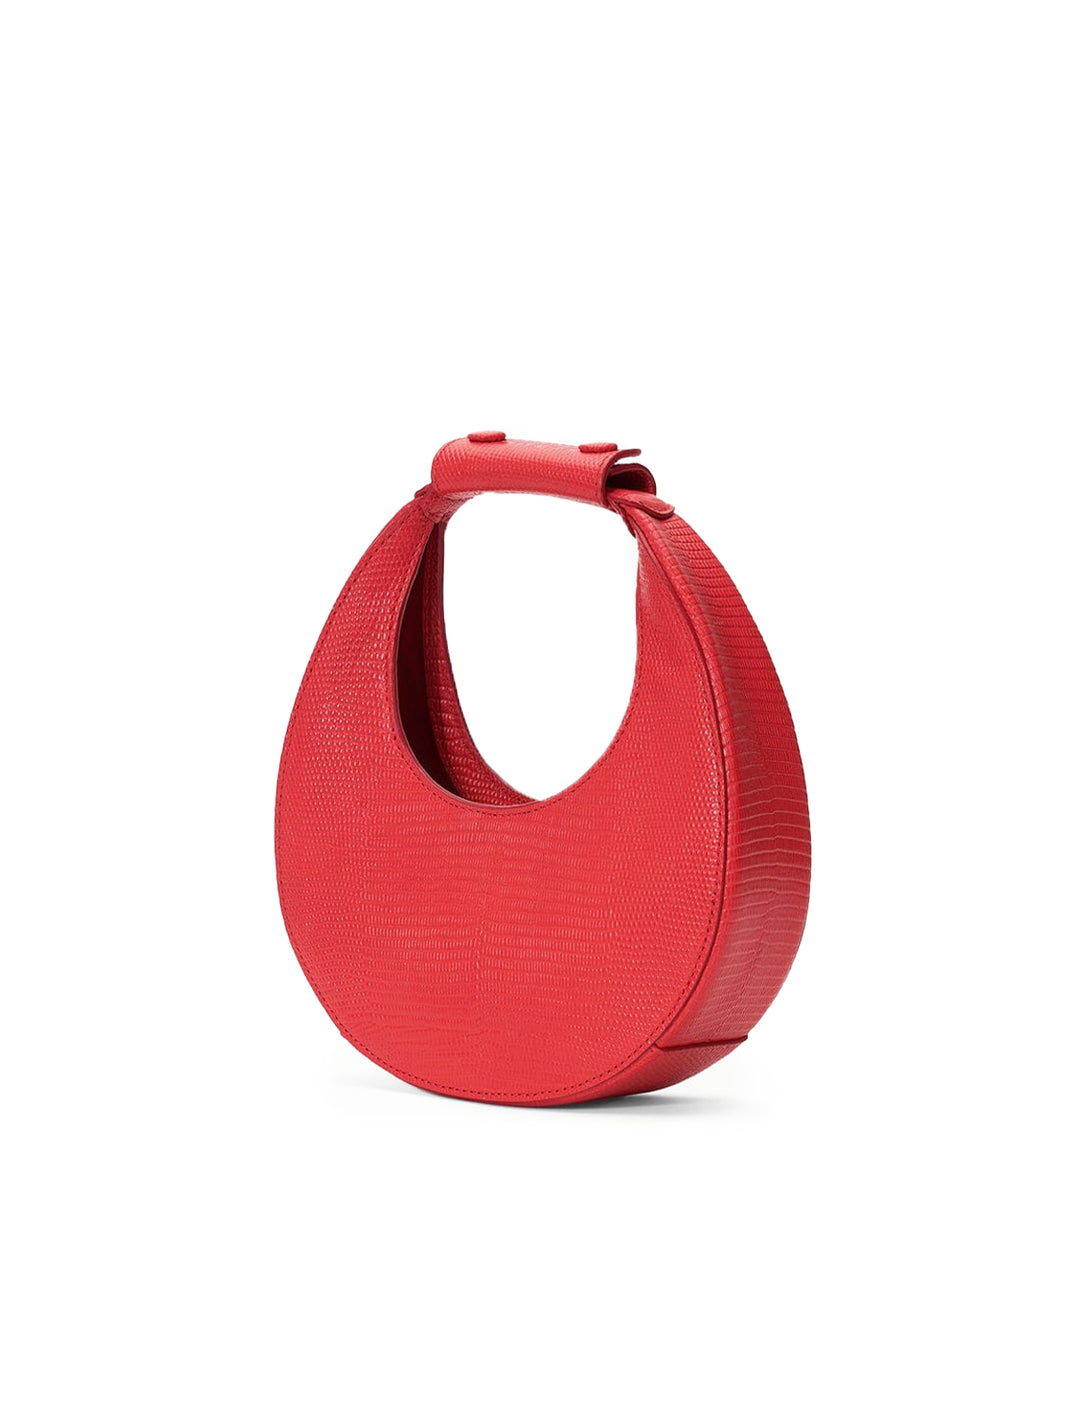 Front angle view of STAUD's good night moon bag in red rose.